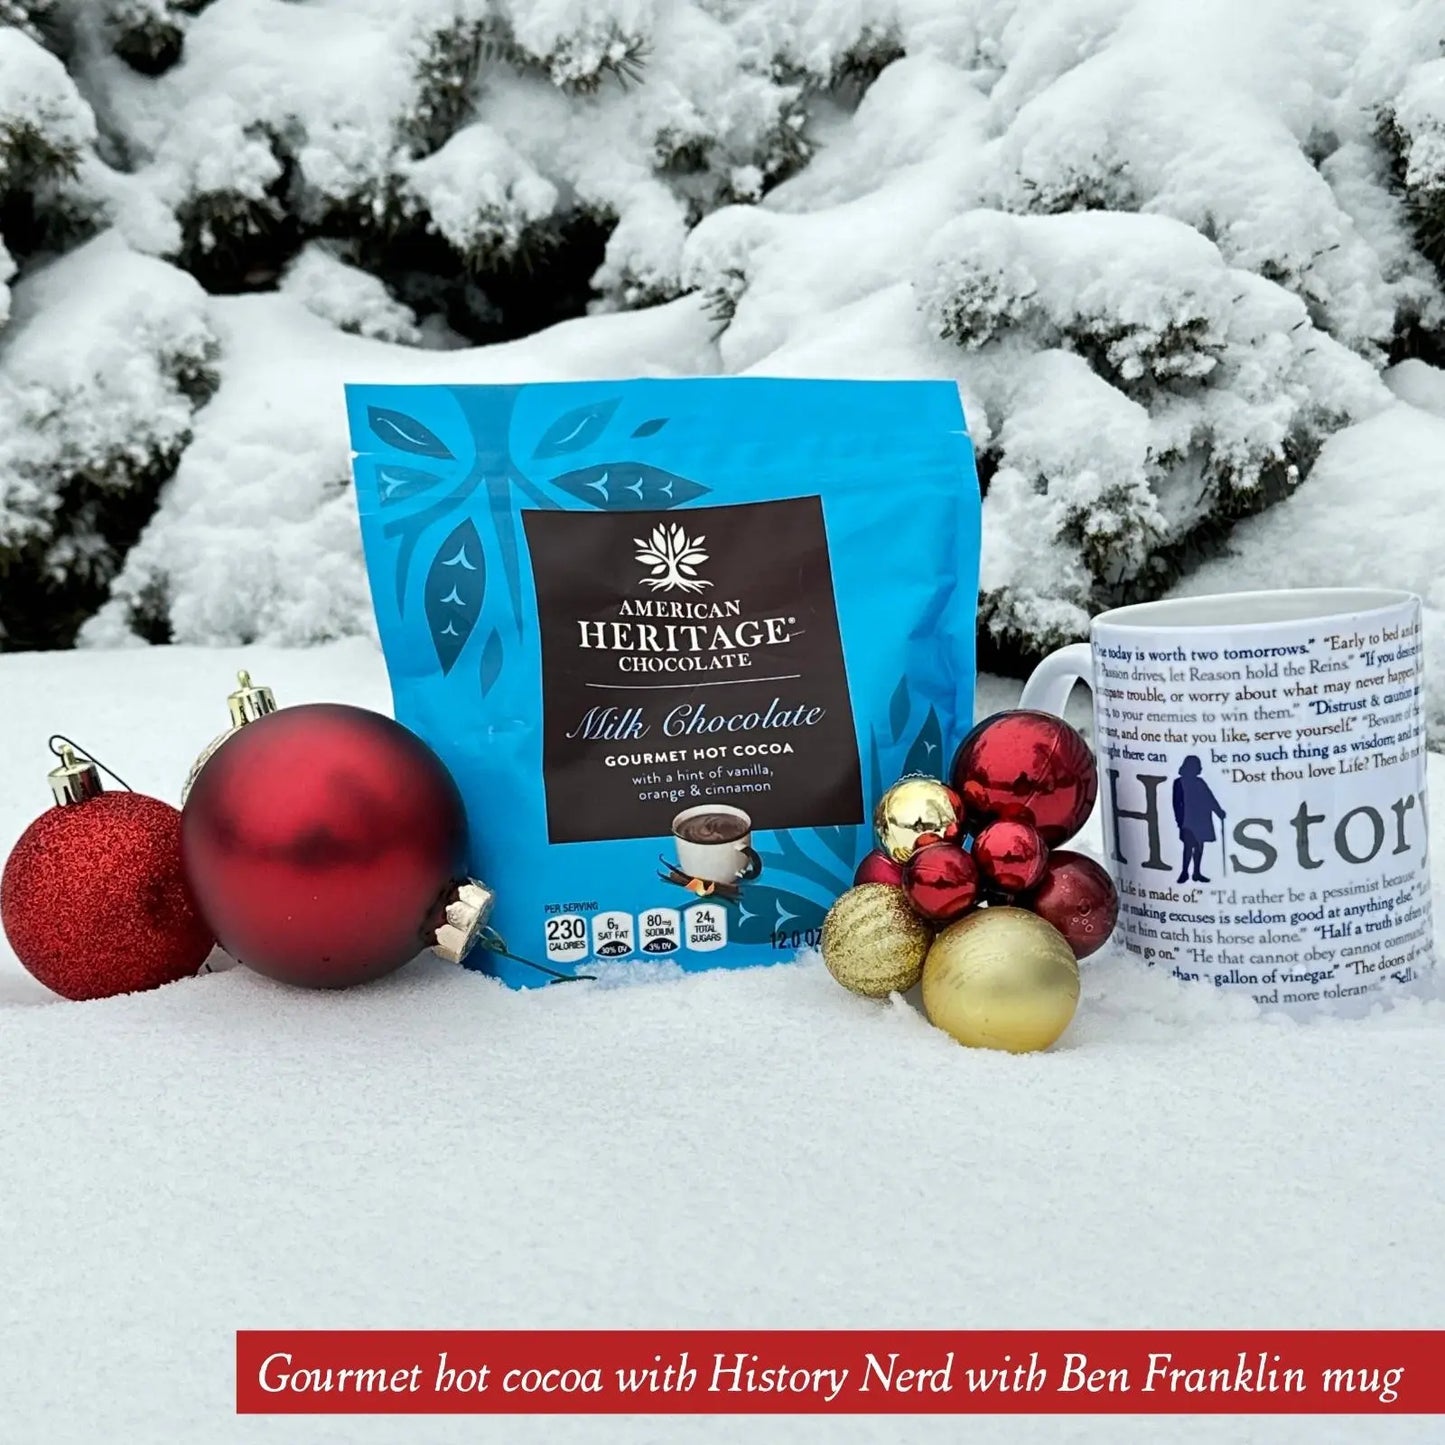 Heritage Gourmet Hot Cocoa and History Nerd mug for History Lovers from The History List store